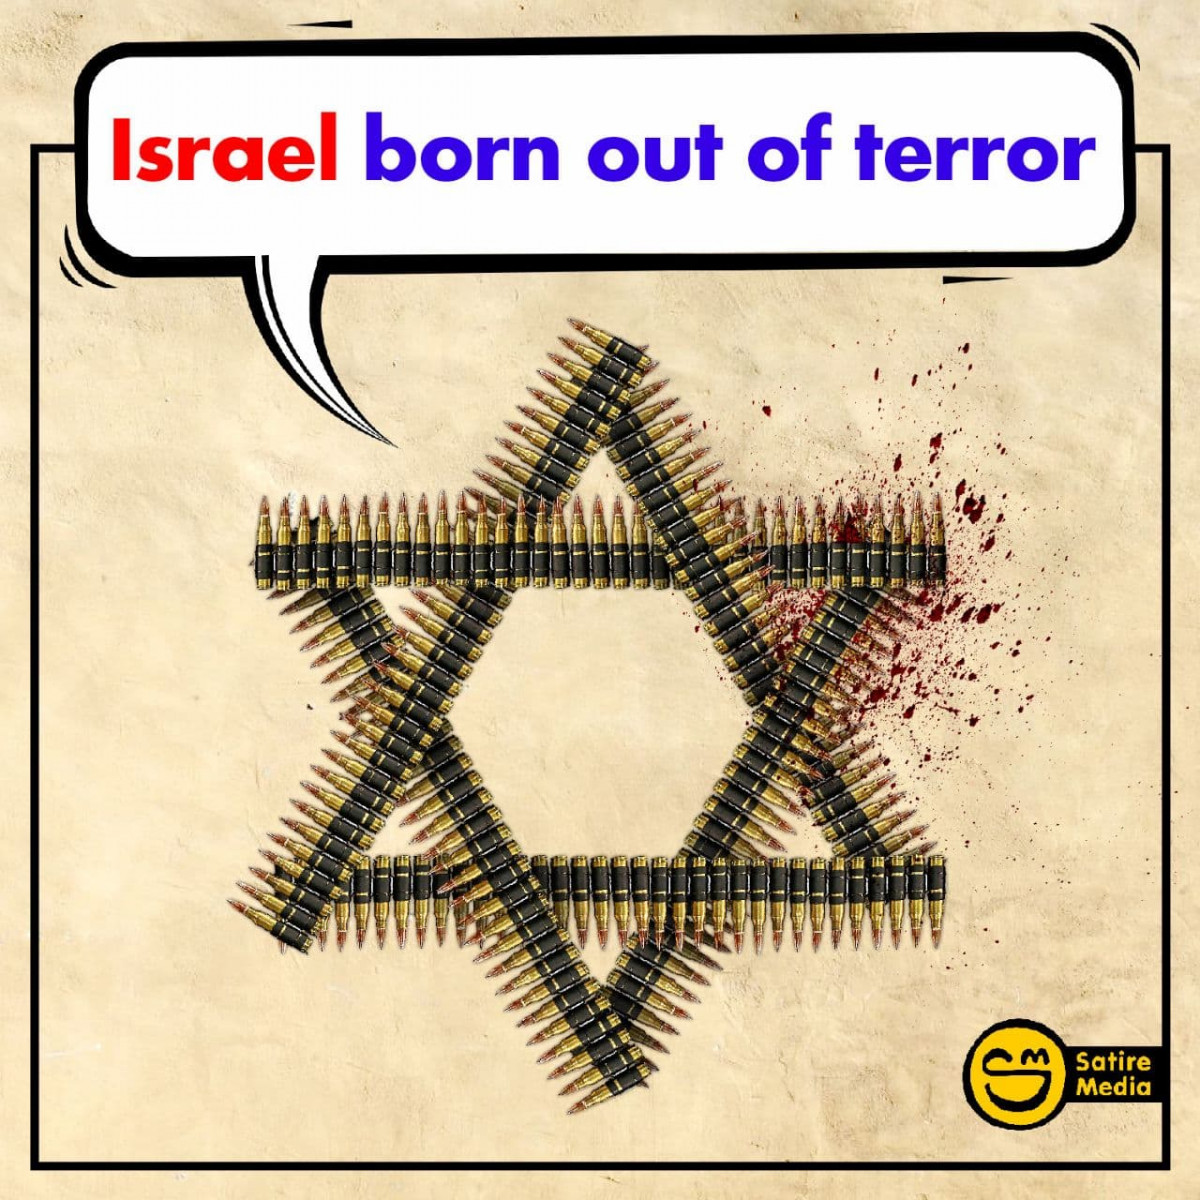 Israel born out of terror